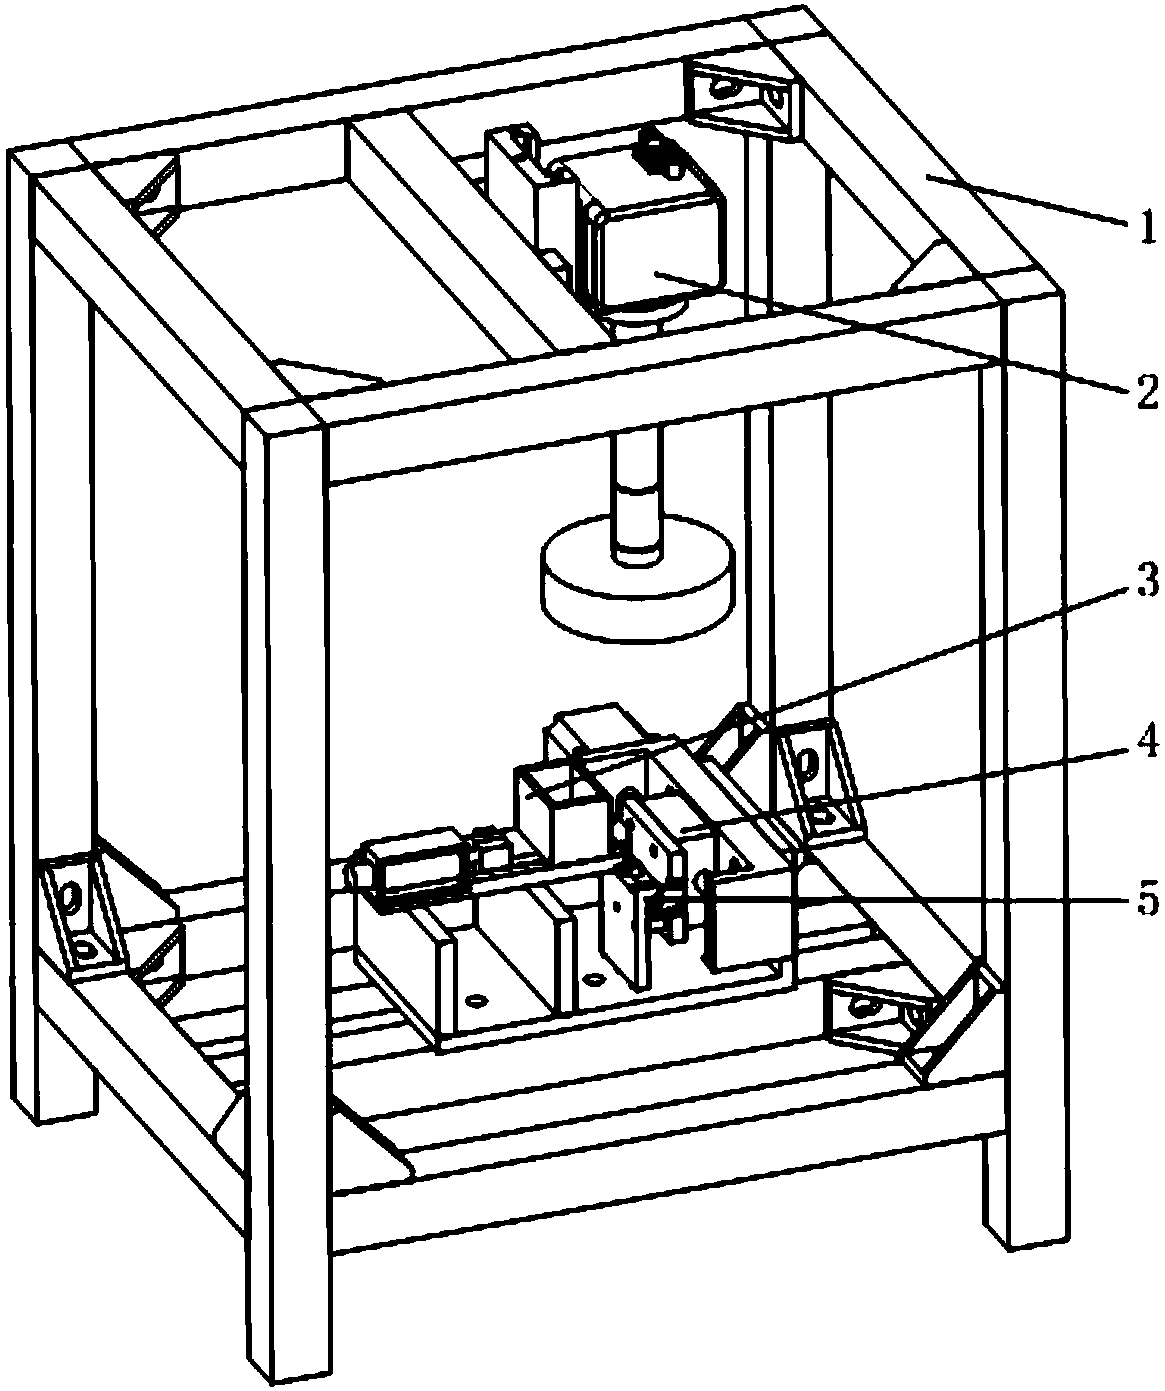 Bead detection sorting device and method